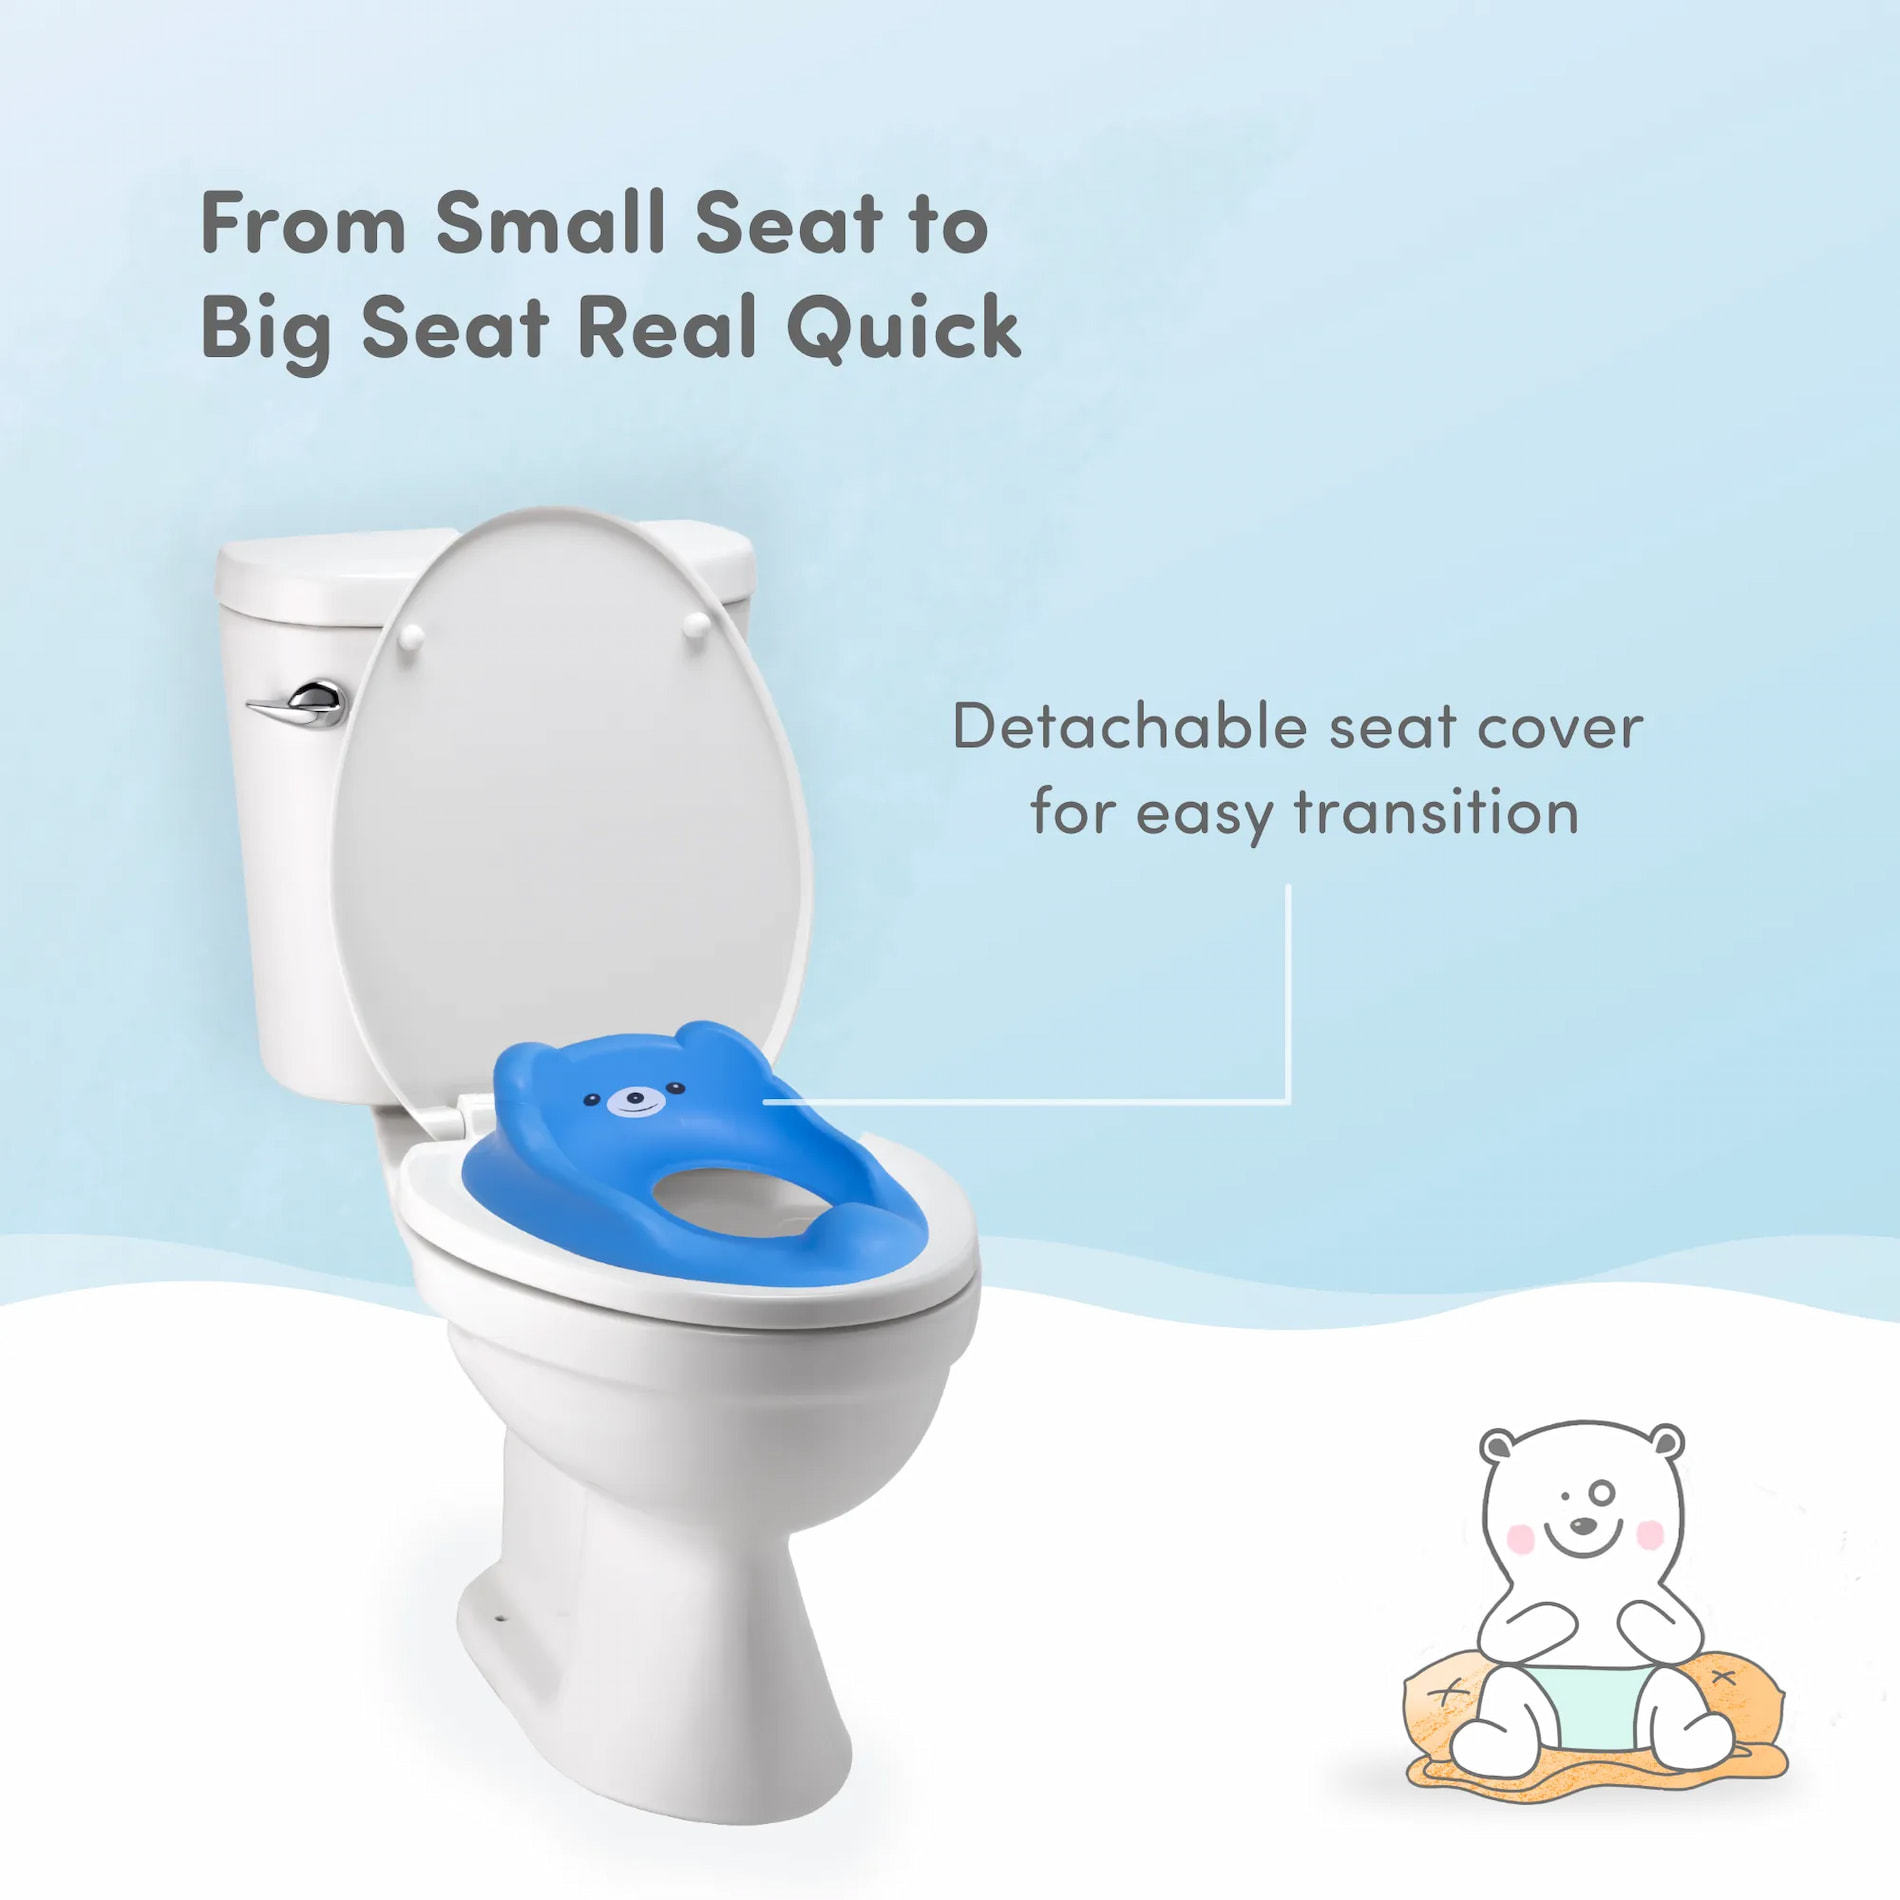 Potty Seat | Baby Potty Chair | 2-in-1 Potty Training Chair with Detachable Potty Bowl | Easy to Carry & Clean - Blue & Purple